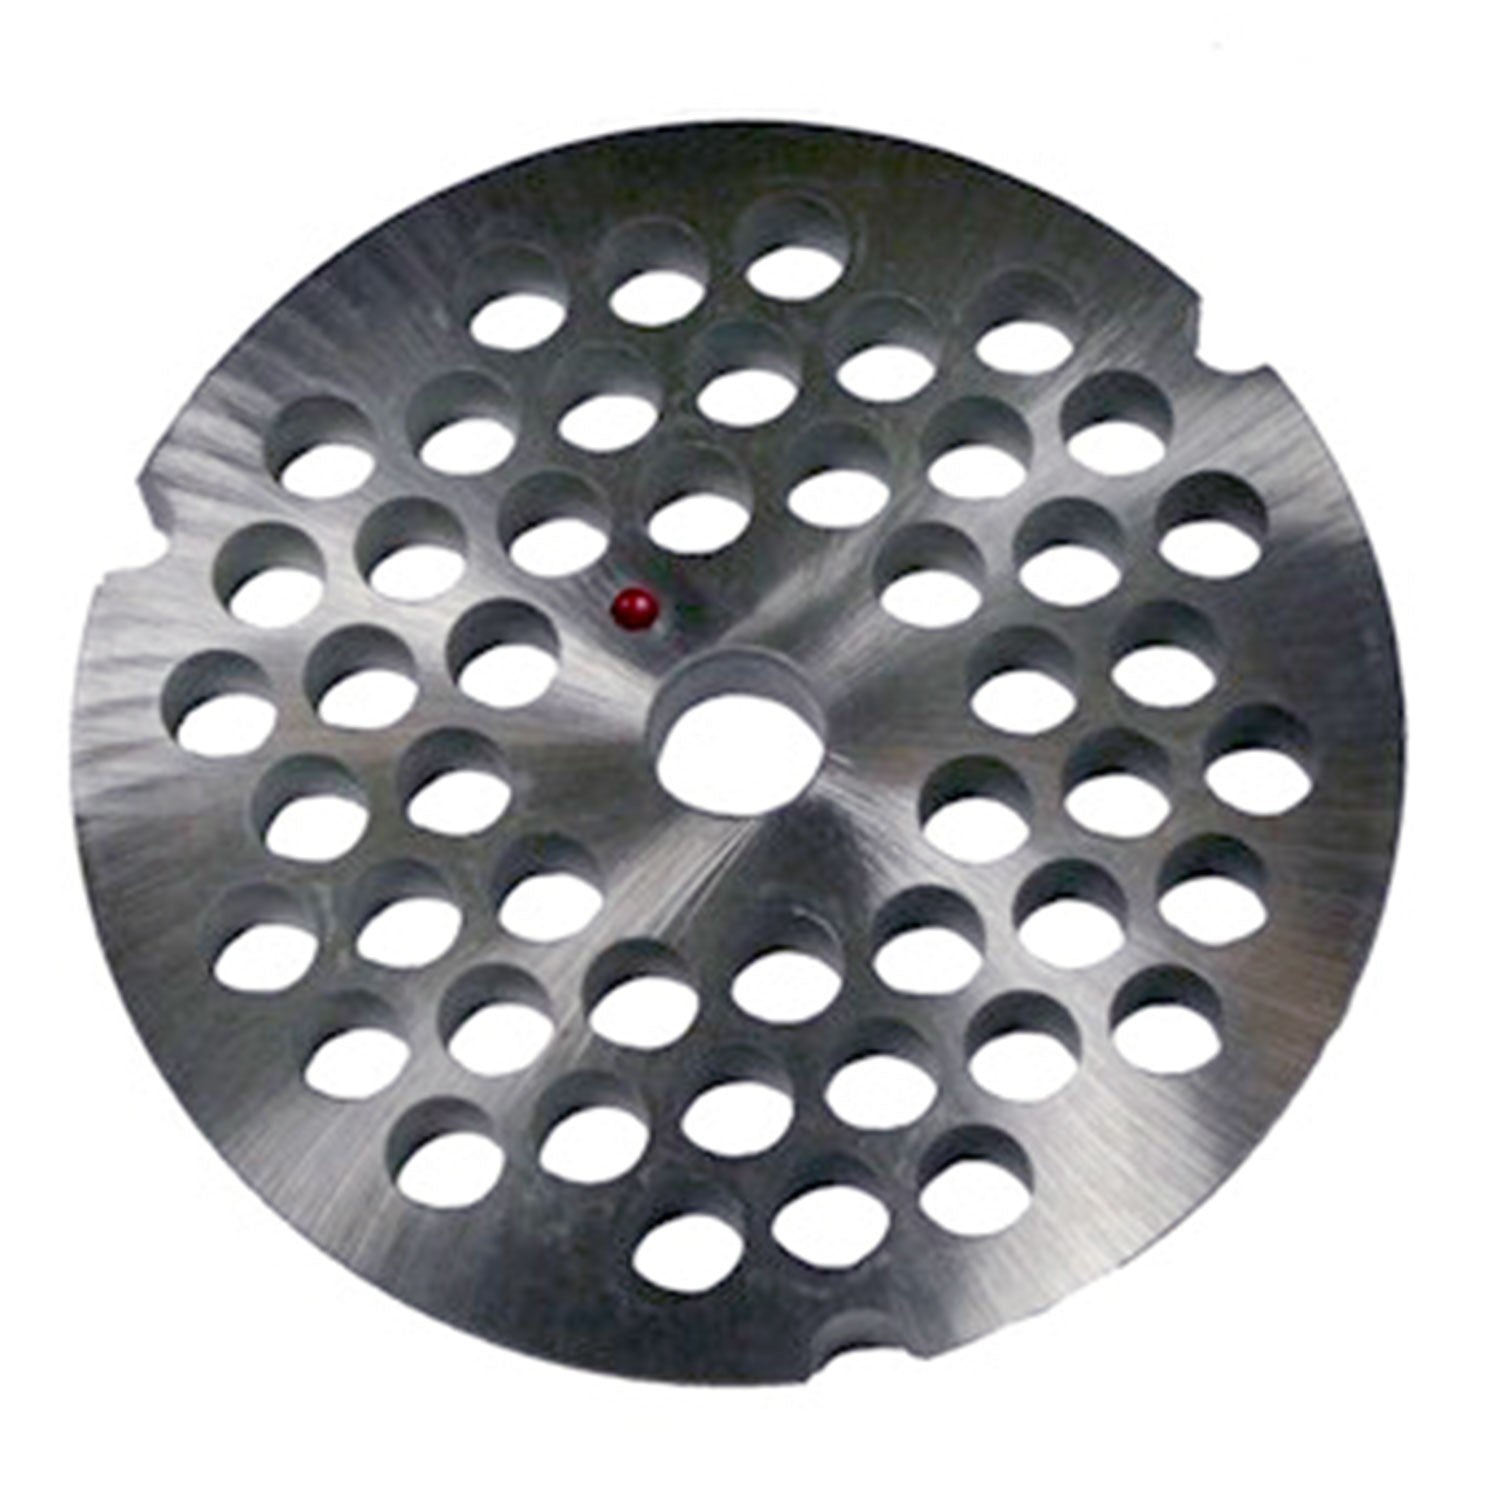 Size 32 DC Reversible Meat Grinder Plate, 3/8